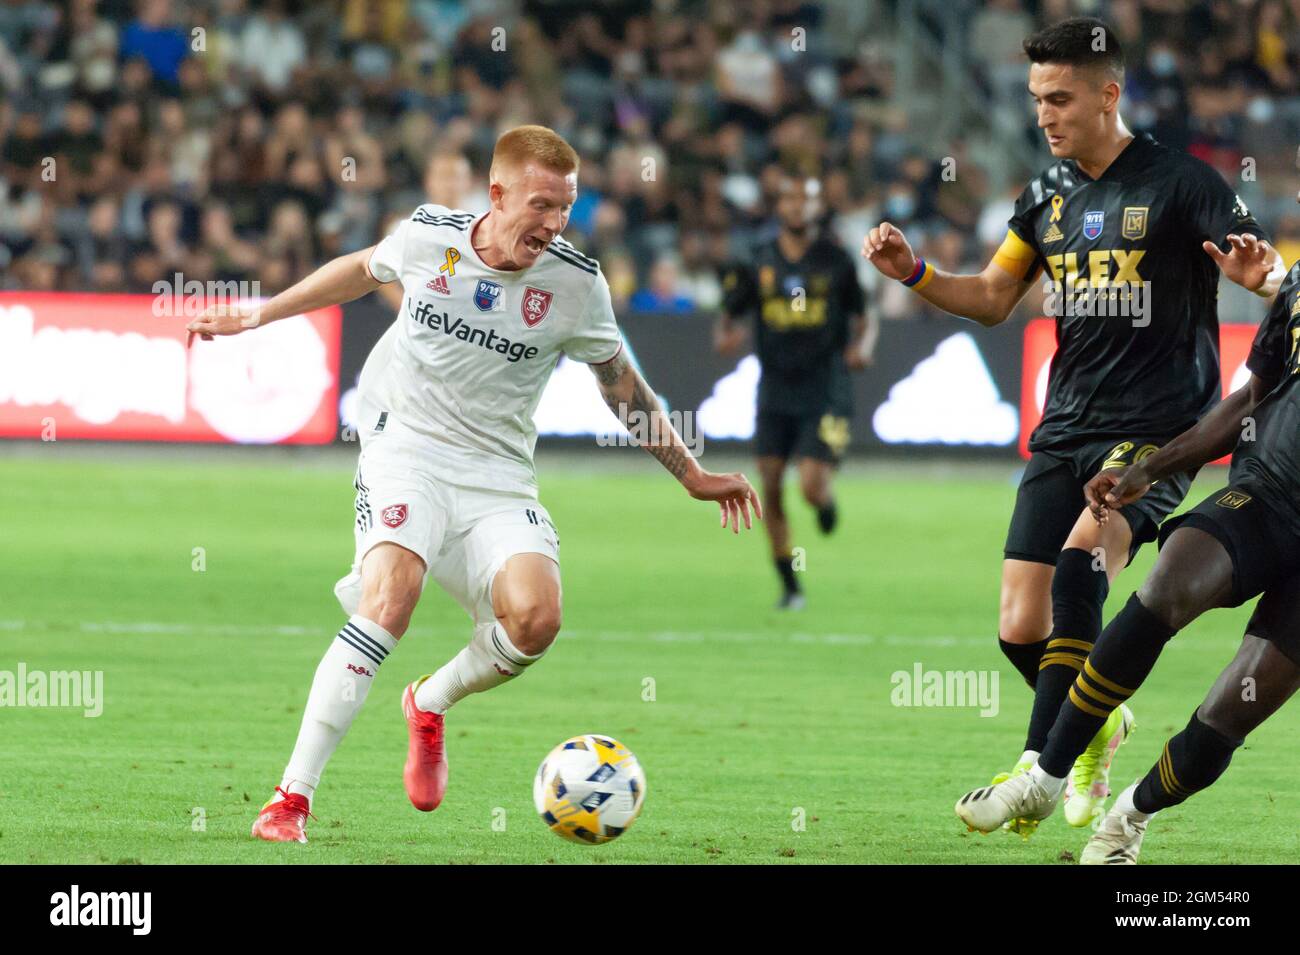 Real Salt Lake defender Justen Glad (15) passes the ball during a MLS game against the LAFC. The LAFC defeated Real Salt Lake 3-2 on Saturday, Sept. 1 Stock Photo